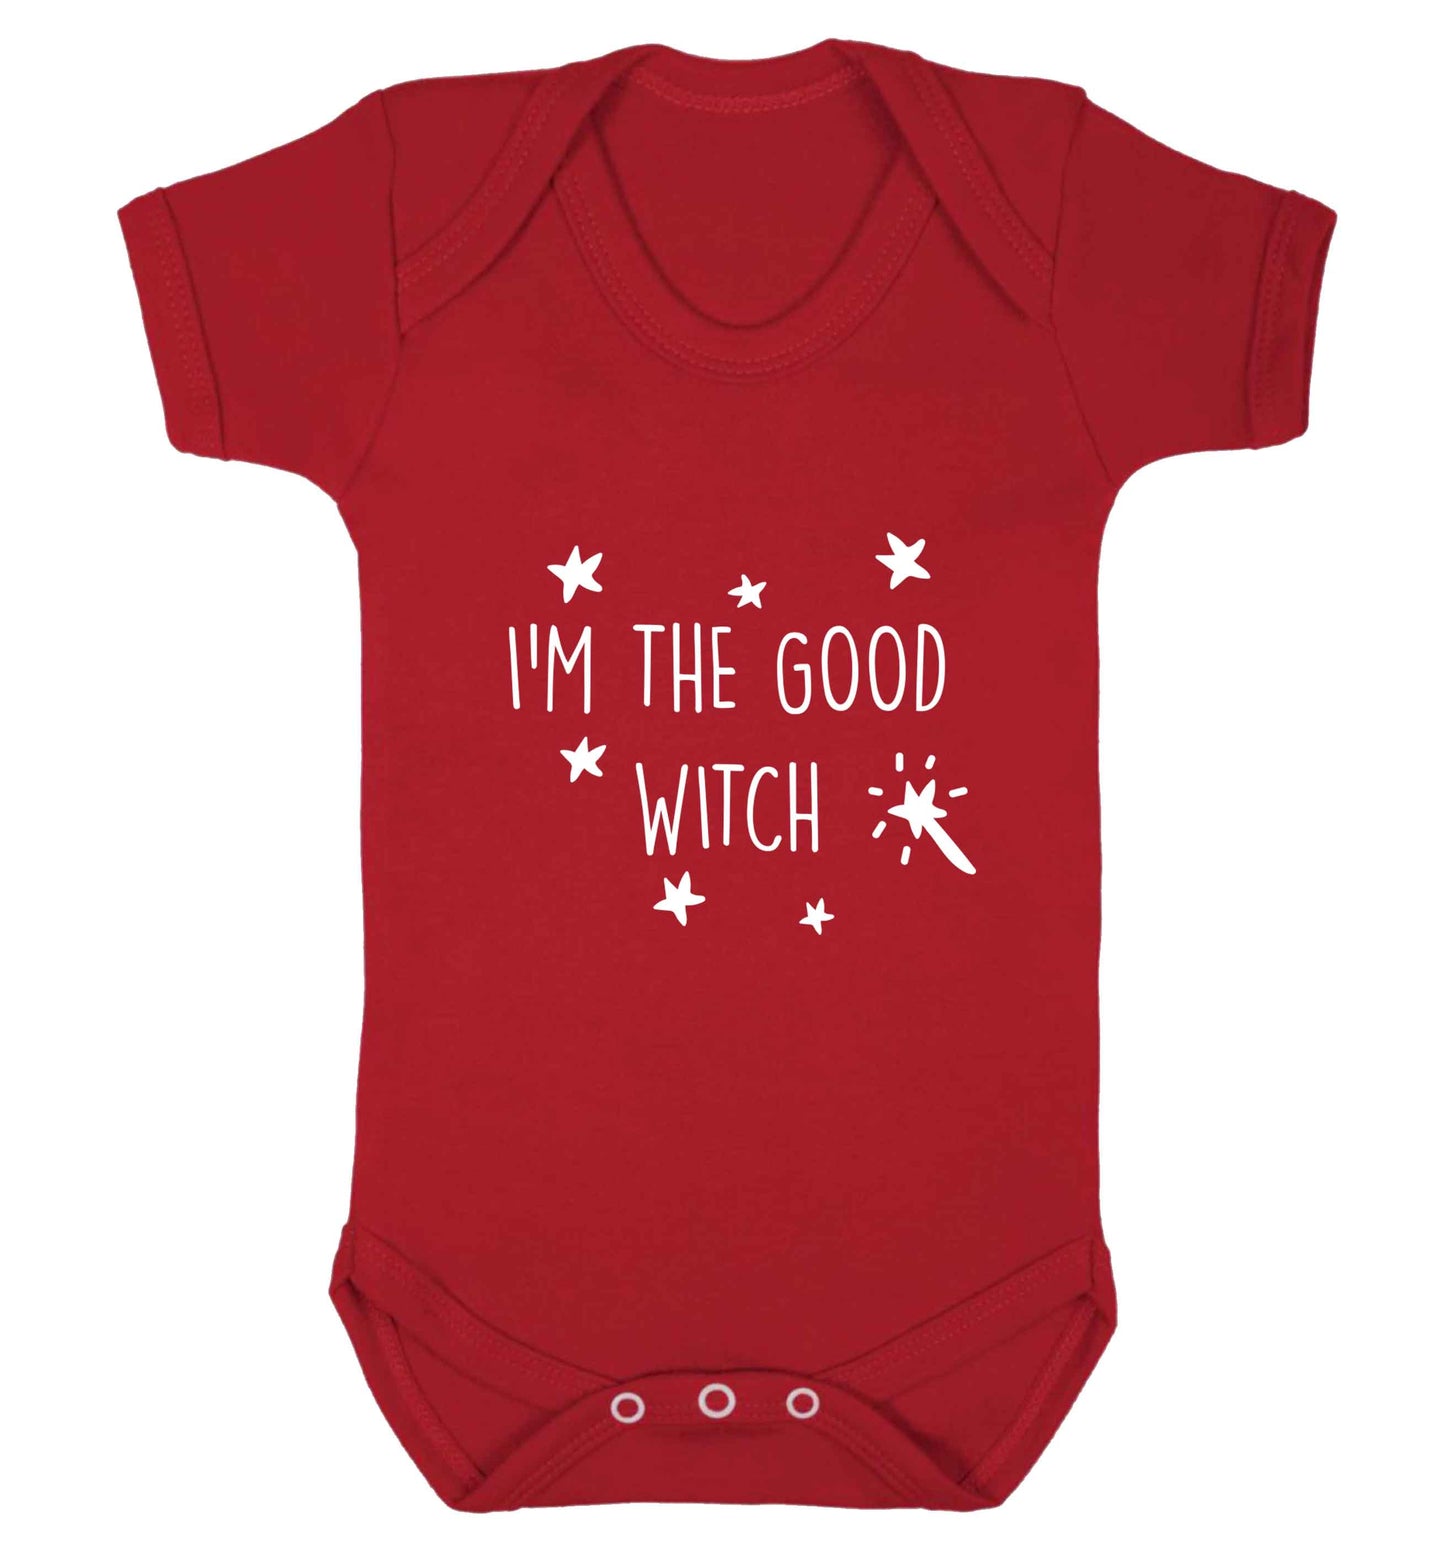 Good witch baby vest red 18-24 months